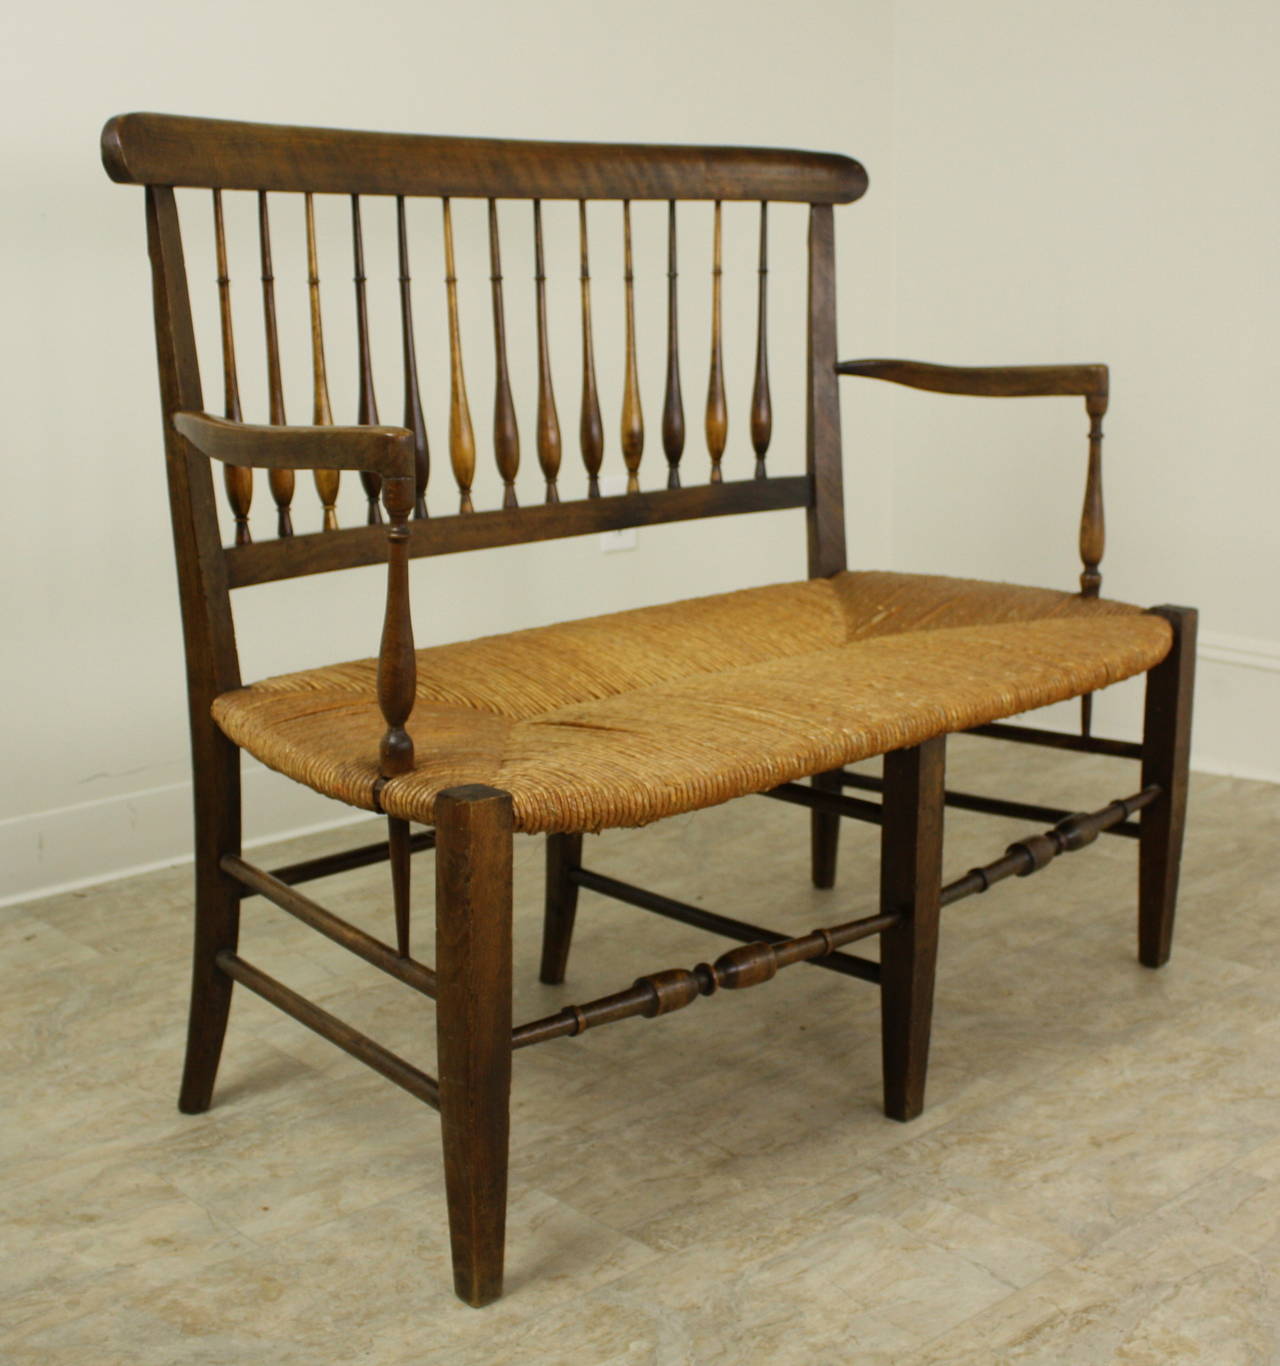 A delightful little two seater bench, the wood frame is a lovely warm color fruitwood.  The carving overall is very well done, with spindles across the back, shaped and carved support stretchers on the base, for good and steady seating.  Turnings